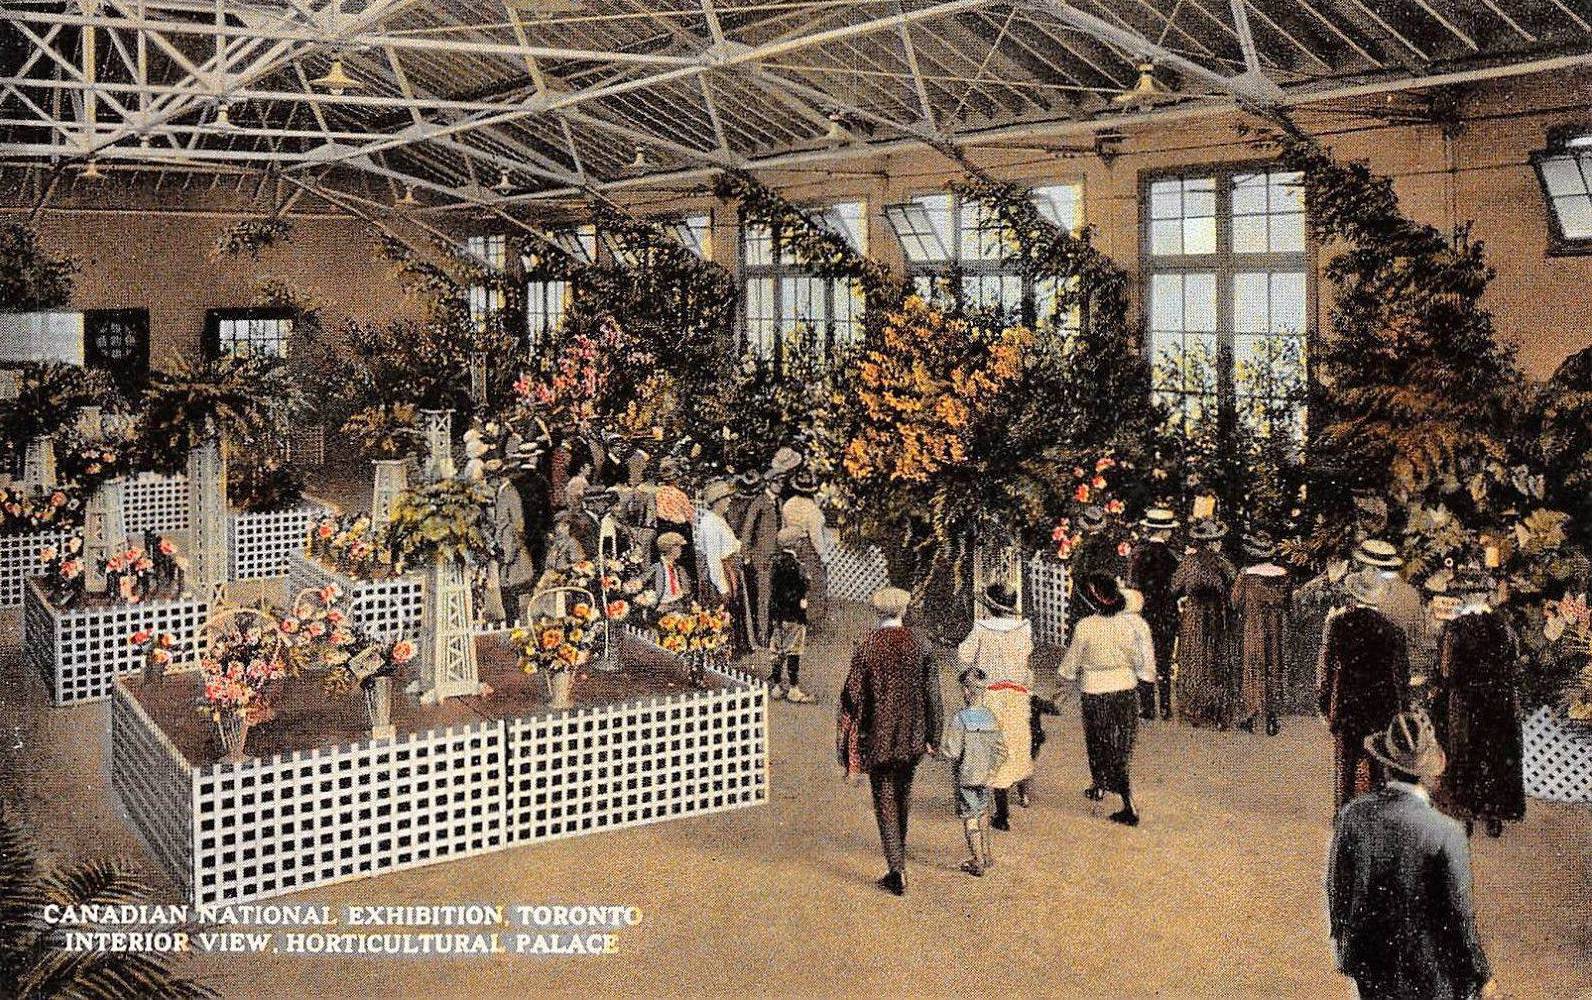 POSTCARD - TORONTO - EXHIBITION - HORTICULTURE PALACE INTERIOR - PEOPLE WALKING THROUGH FLORAL DISPLAYS - TINTED - REALLY NICE VERSION - c1920